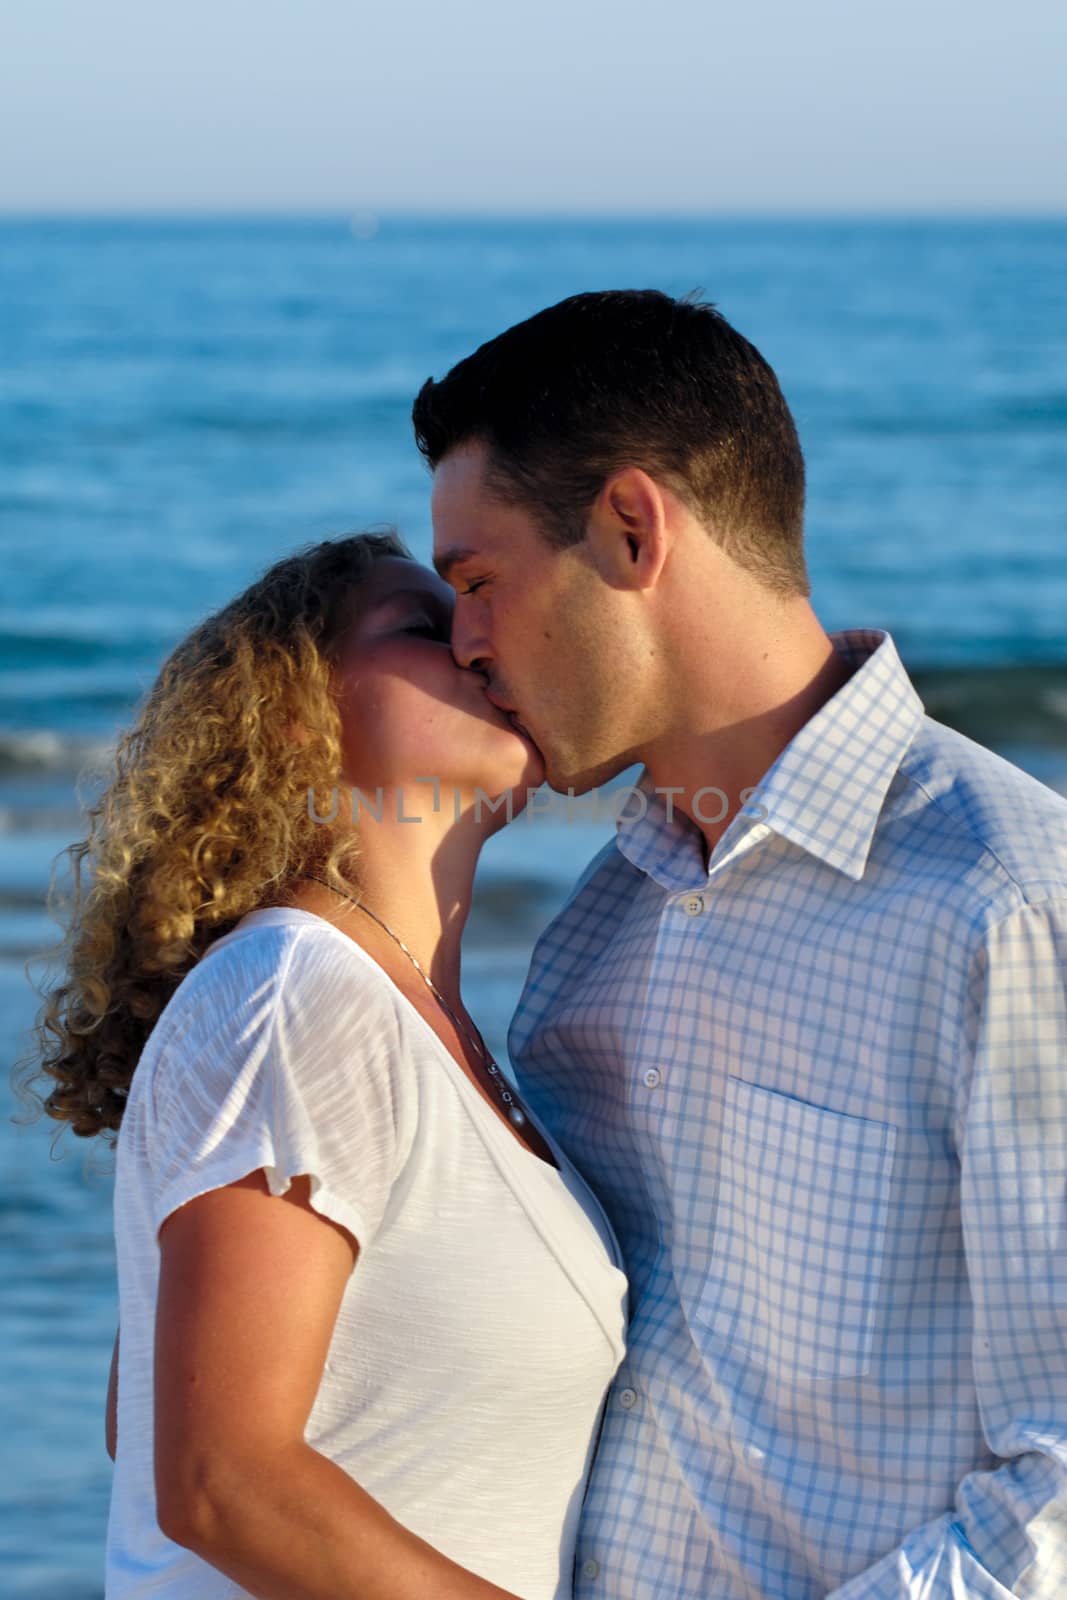 A young couple a standing near beach kissing.